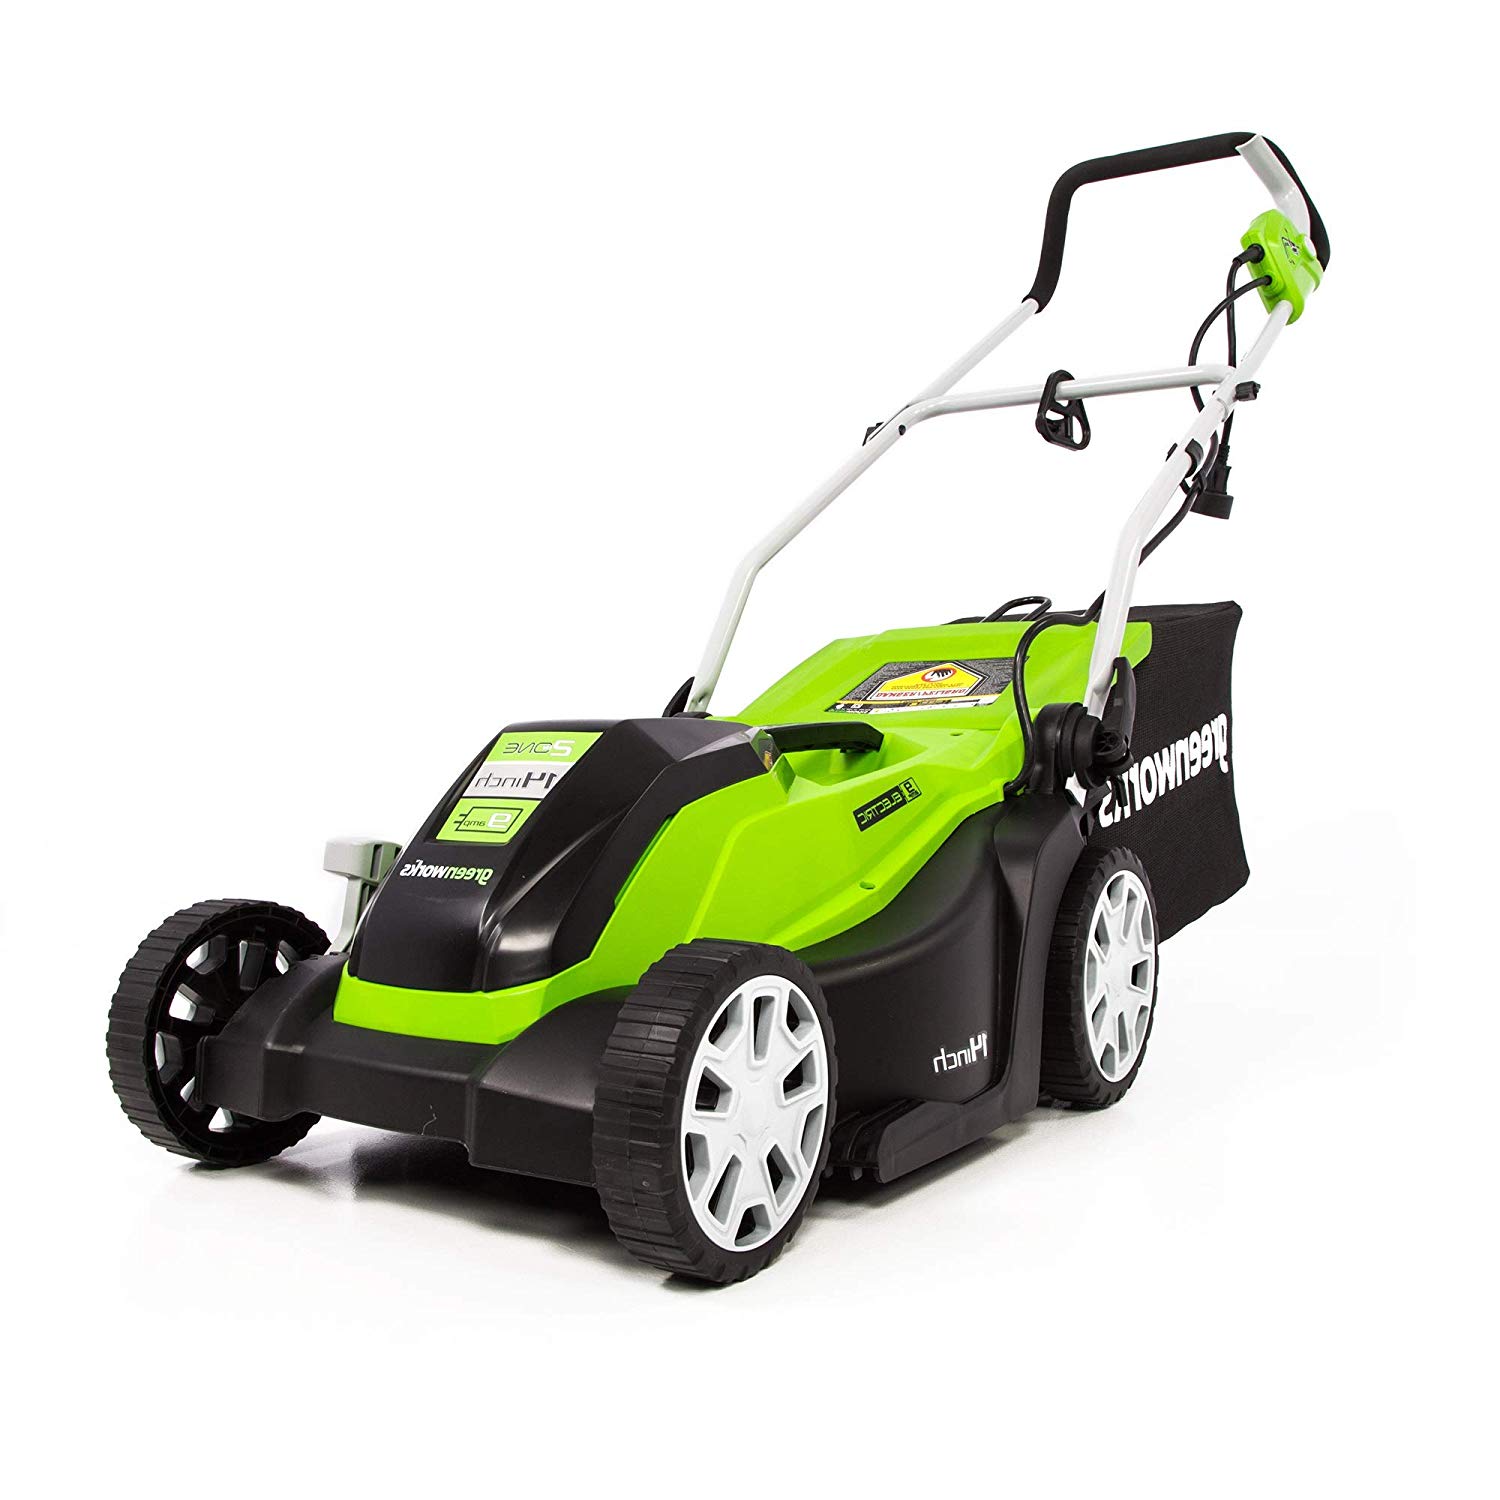 Greenworks 14-Inch 9 Amp Corded Electric Lawn Mower MO09B01